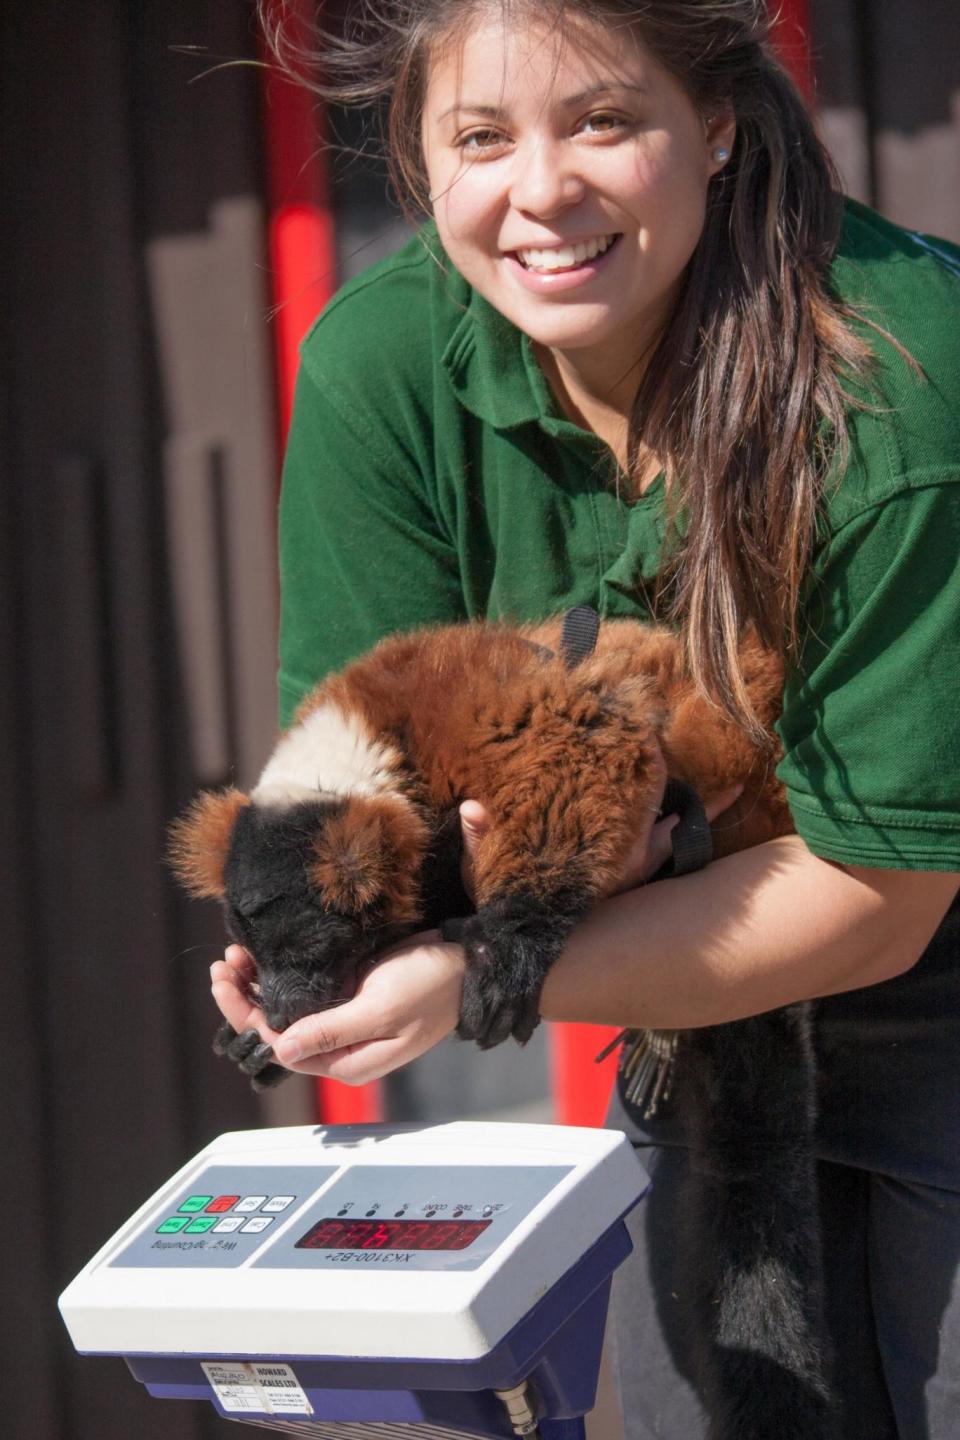 Angelina Lawson weighing Sid, a red-ruffed lemur, as London Zoo in 2014